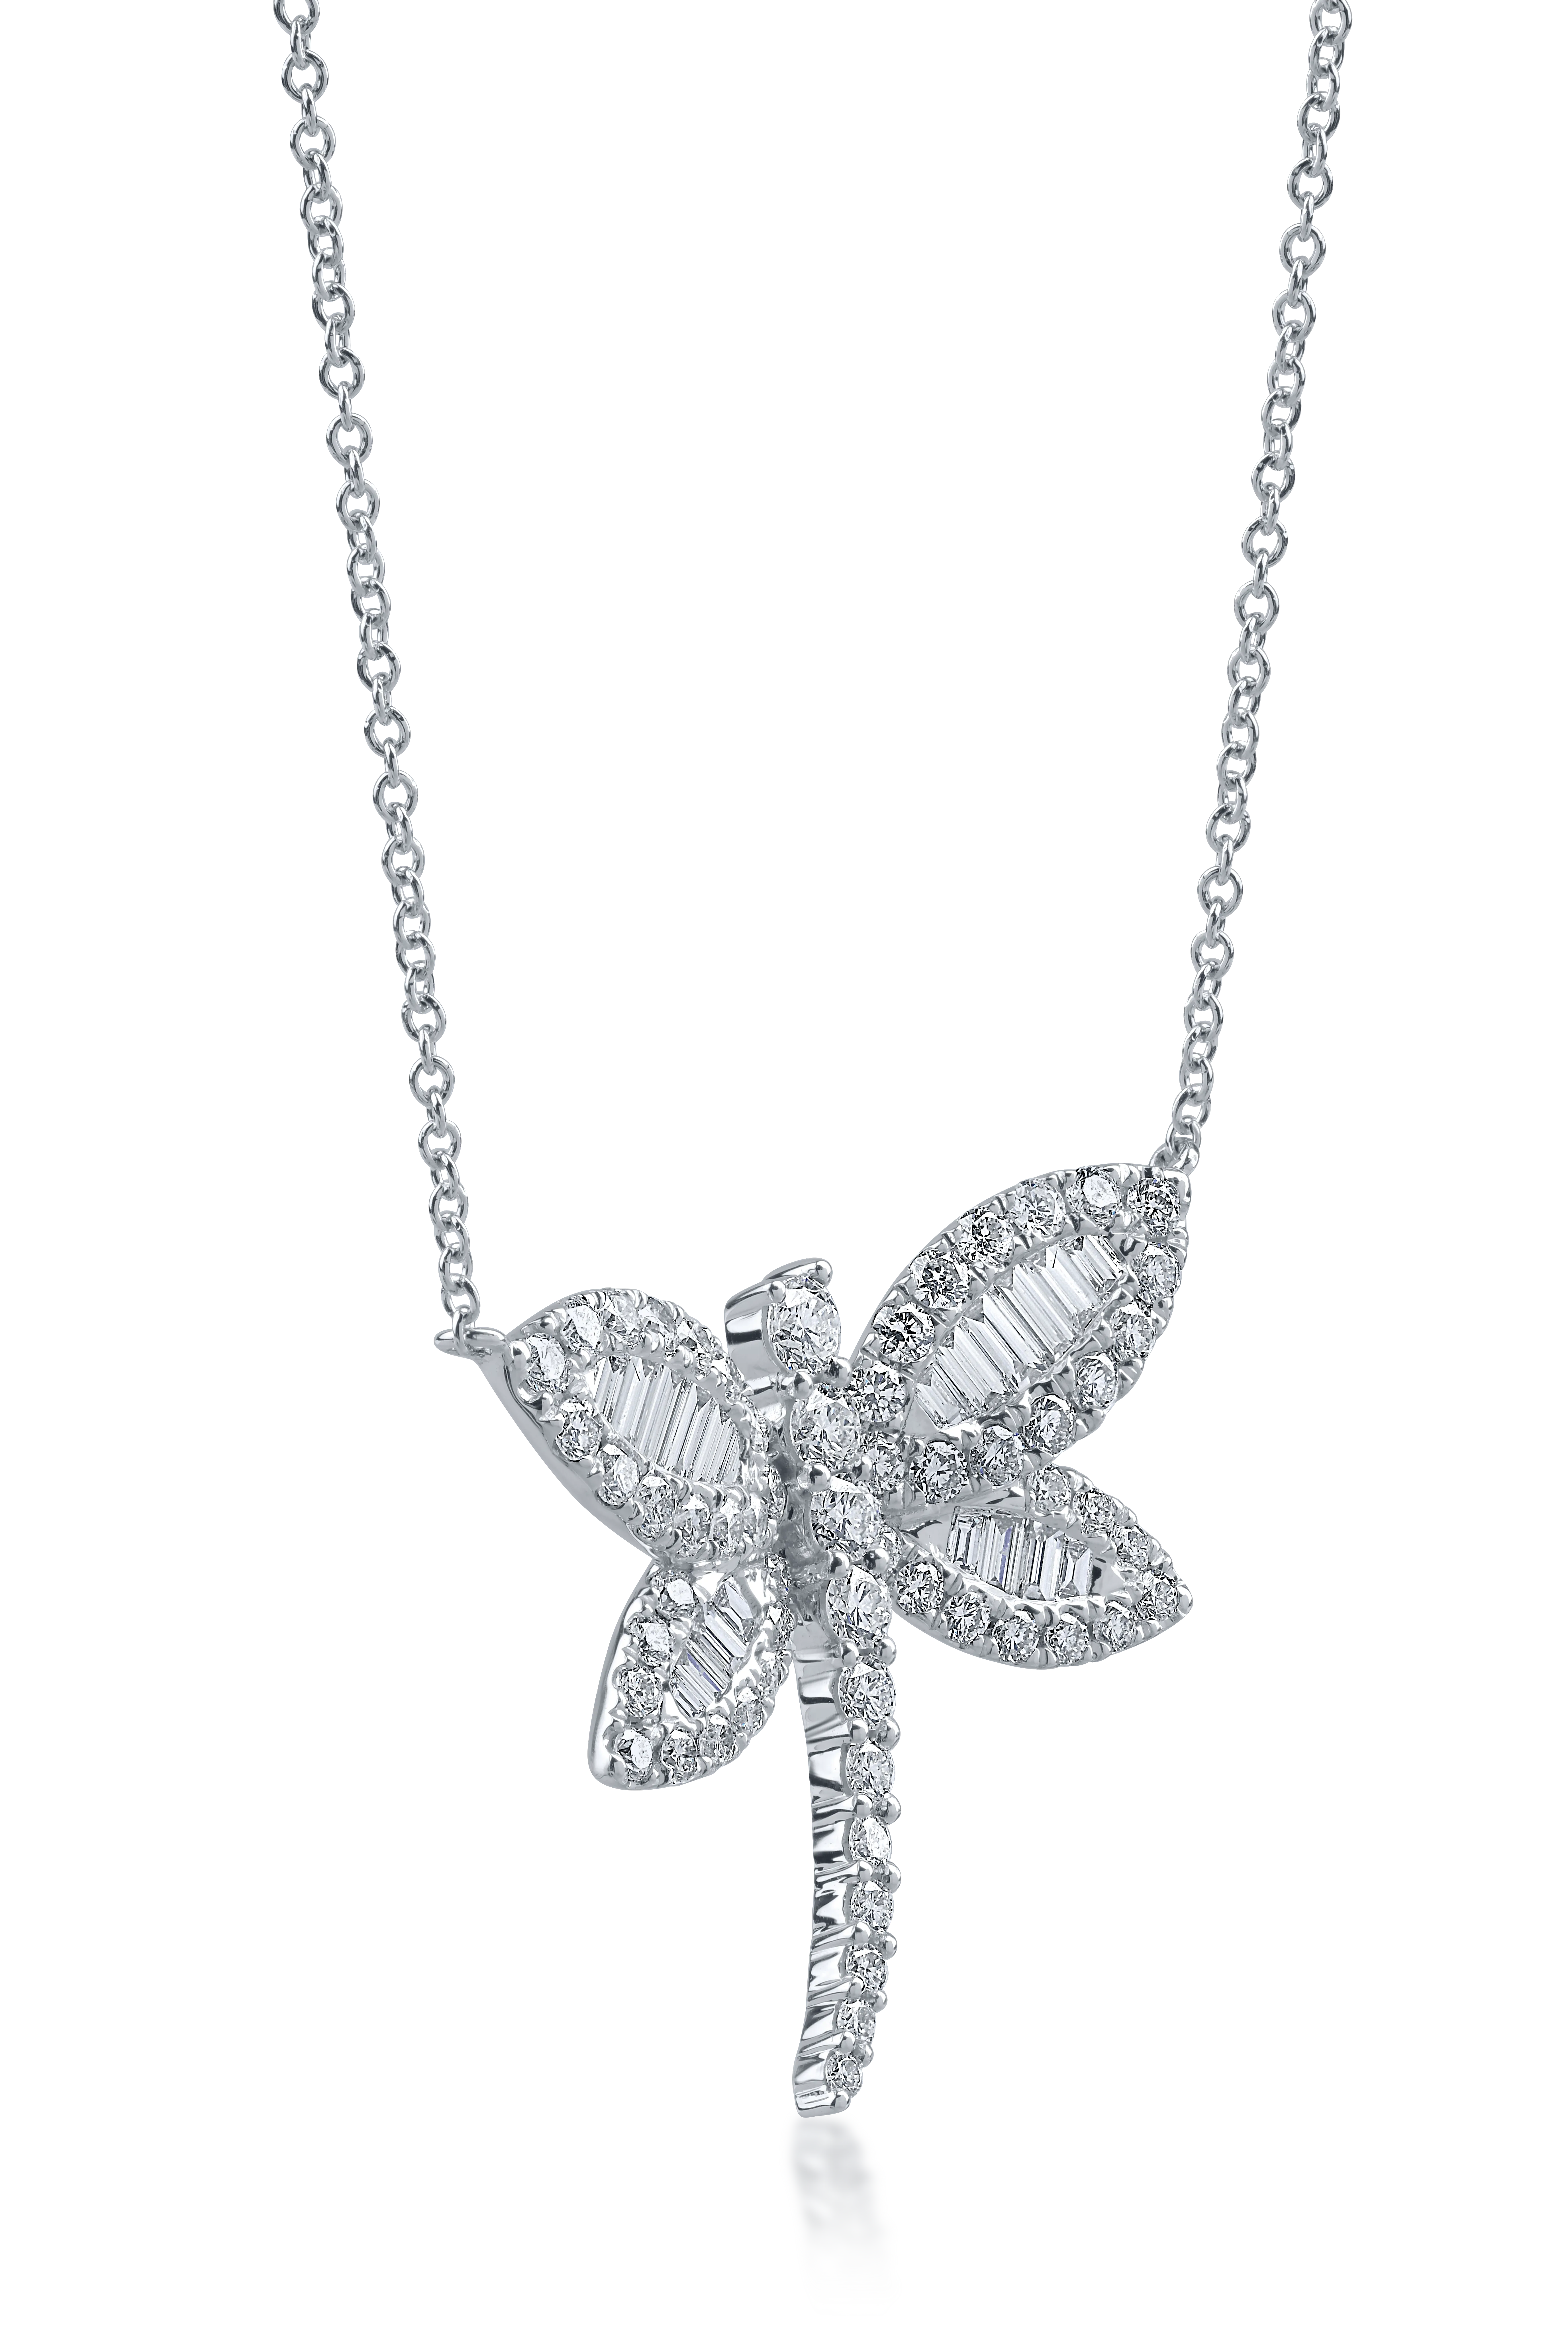 White gold chain with dragonfly pendant with 1.96ct diamonds